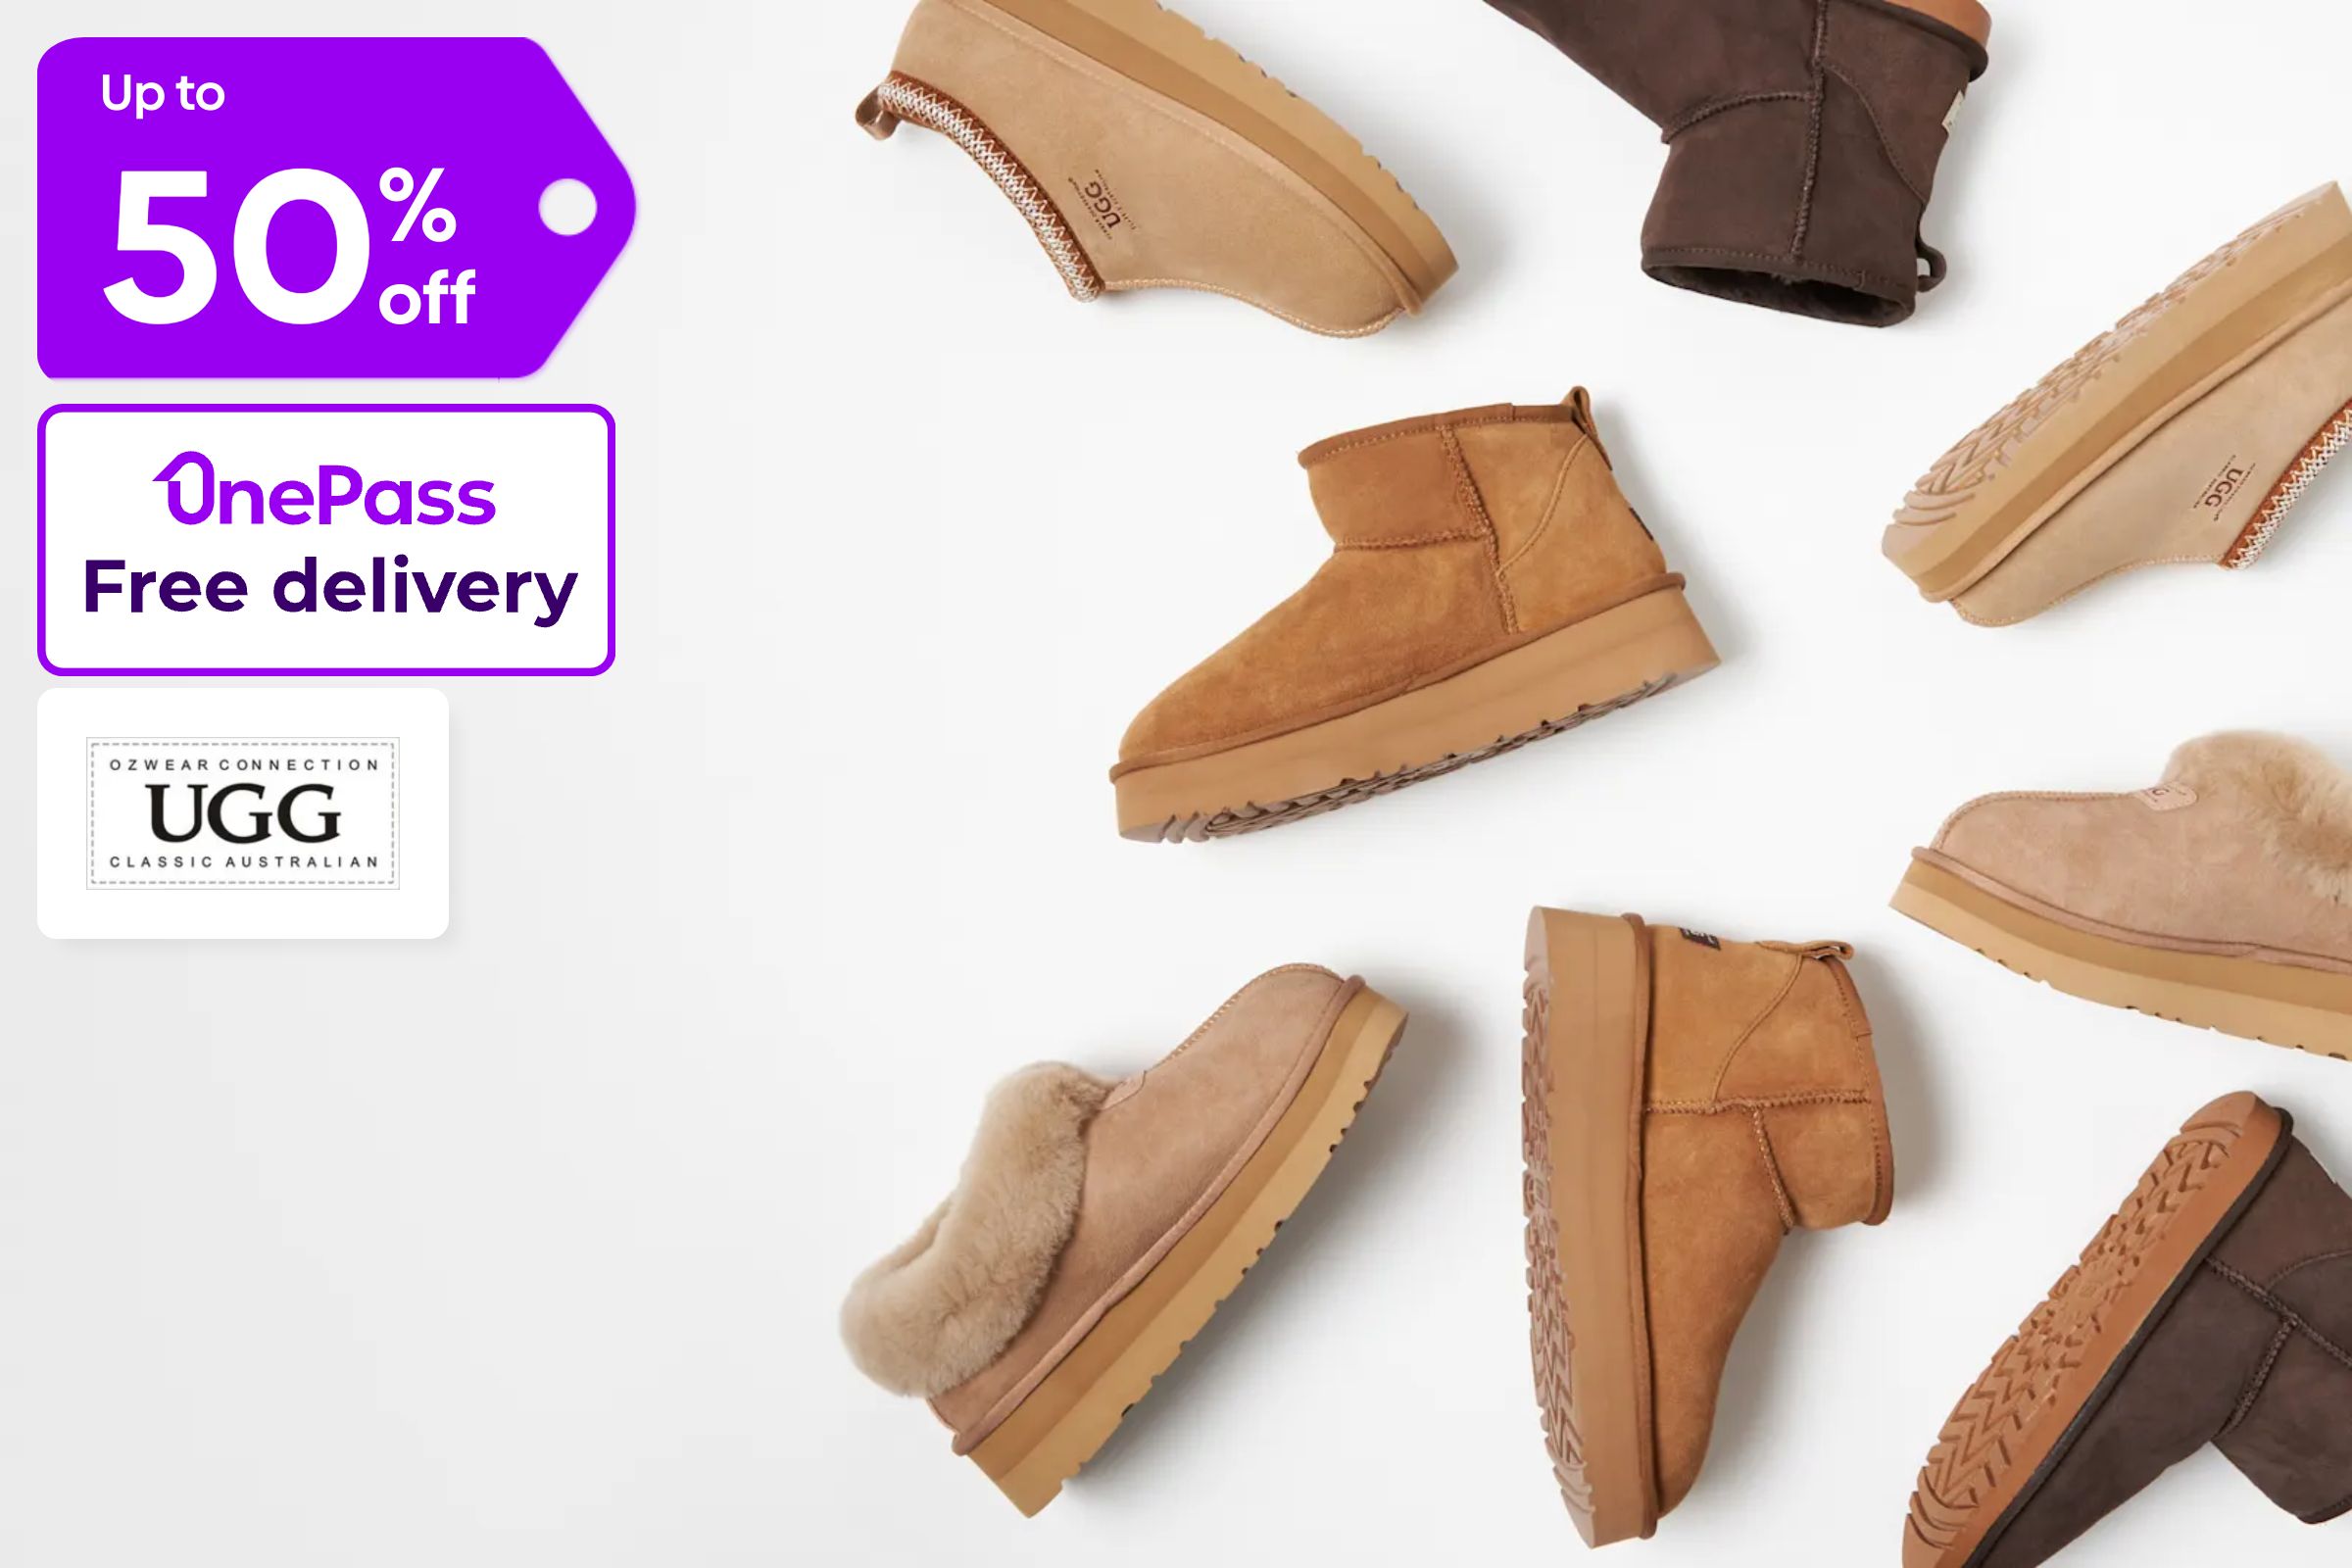 Up to 50% off Ugg Boots & Slippers